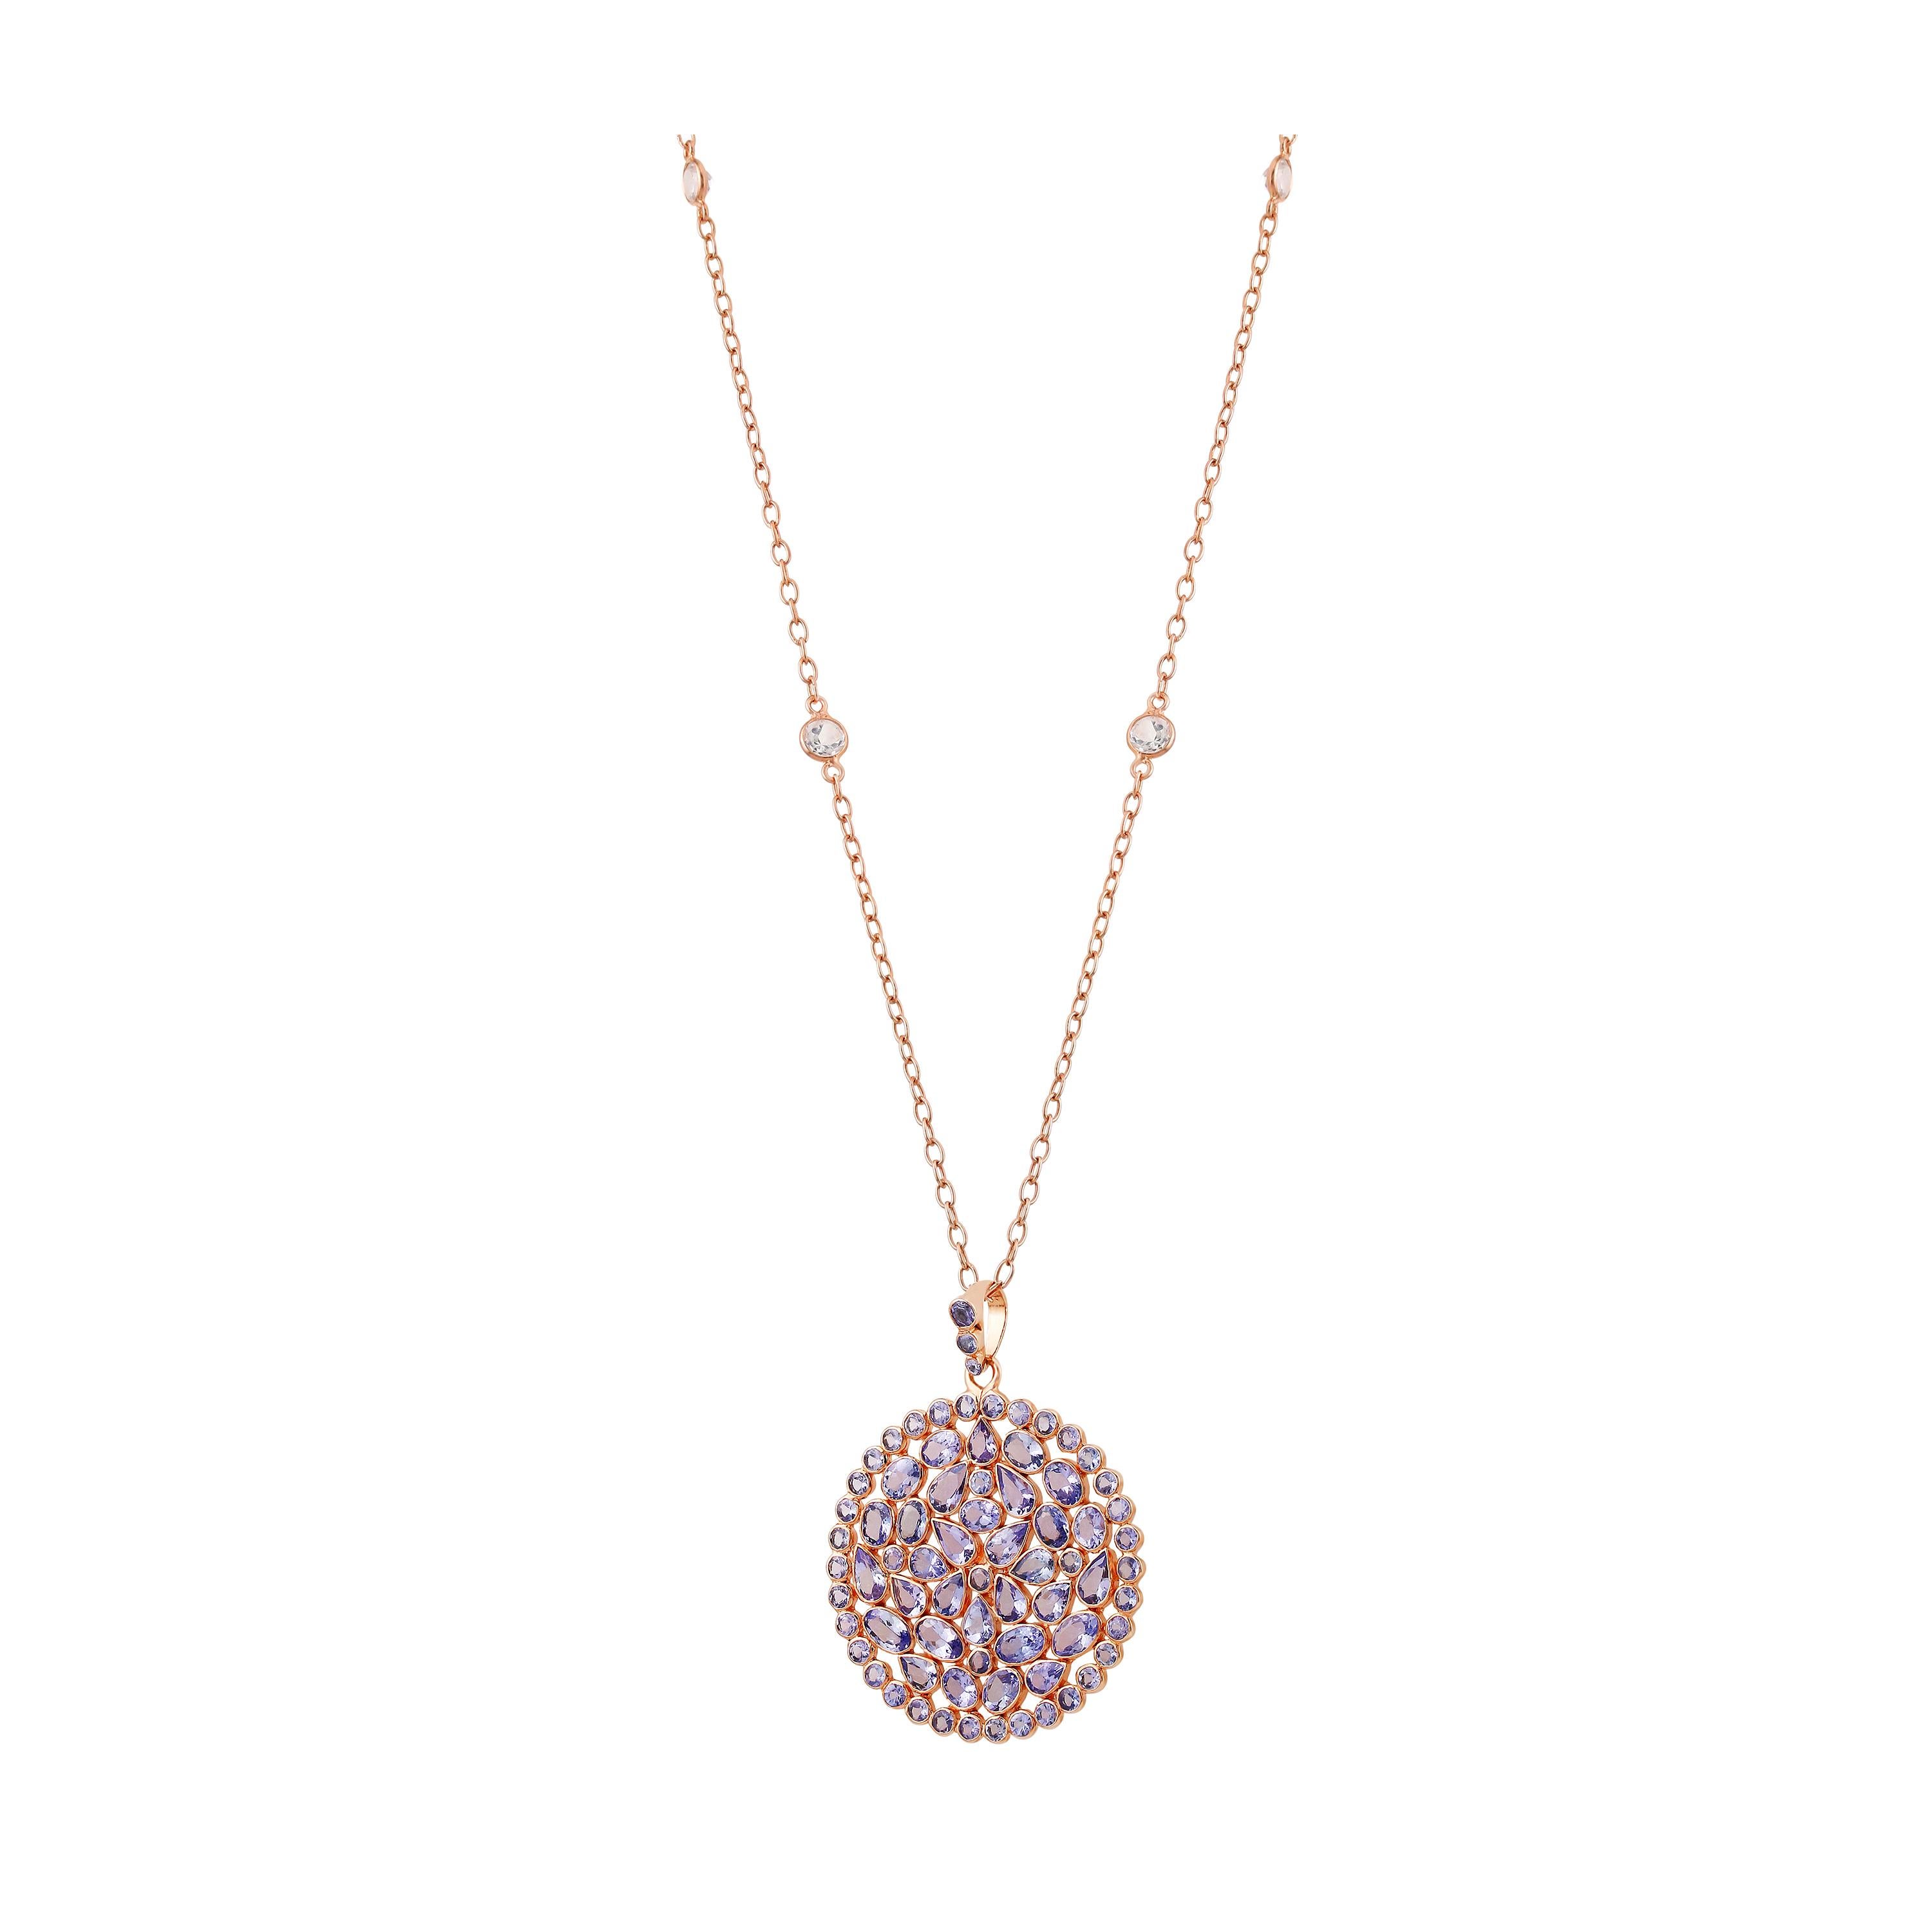 Add some finesse to your outfits with this Gemistry Victorian gorgeous pendant necklace. Magical Tanaznites are set within a sparkling frame of white topaz in this handcrafted necklace of sterling silver, plated in rose. Wear it solo or match it